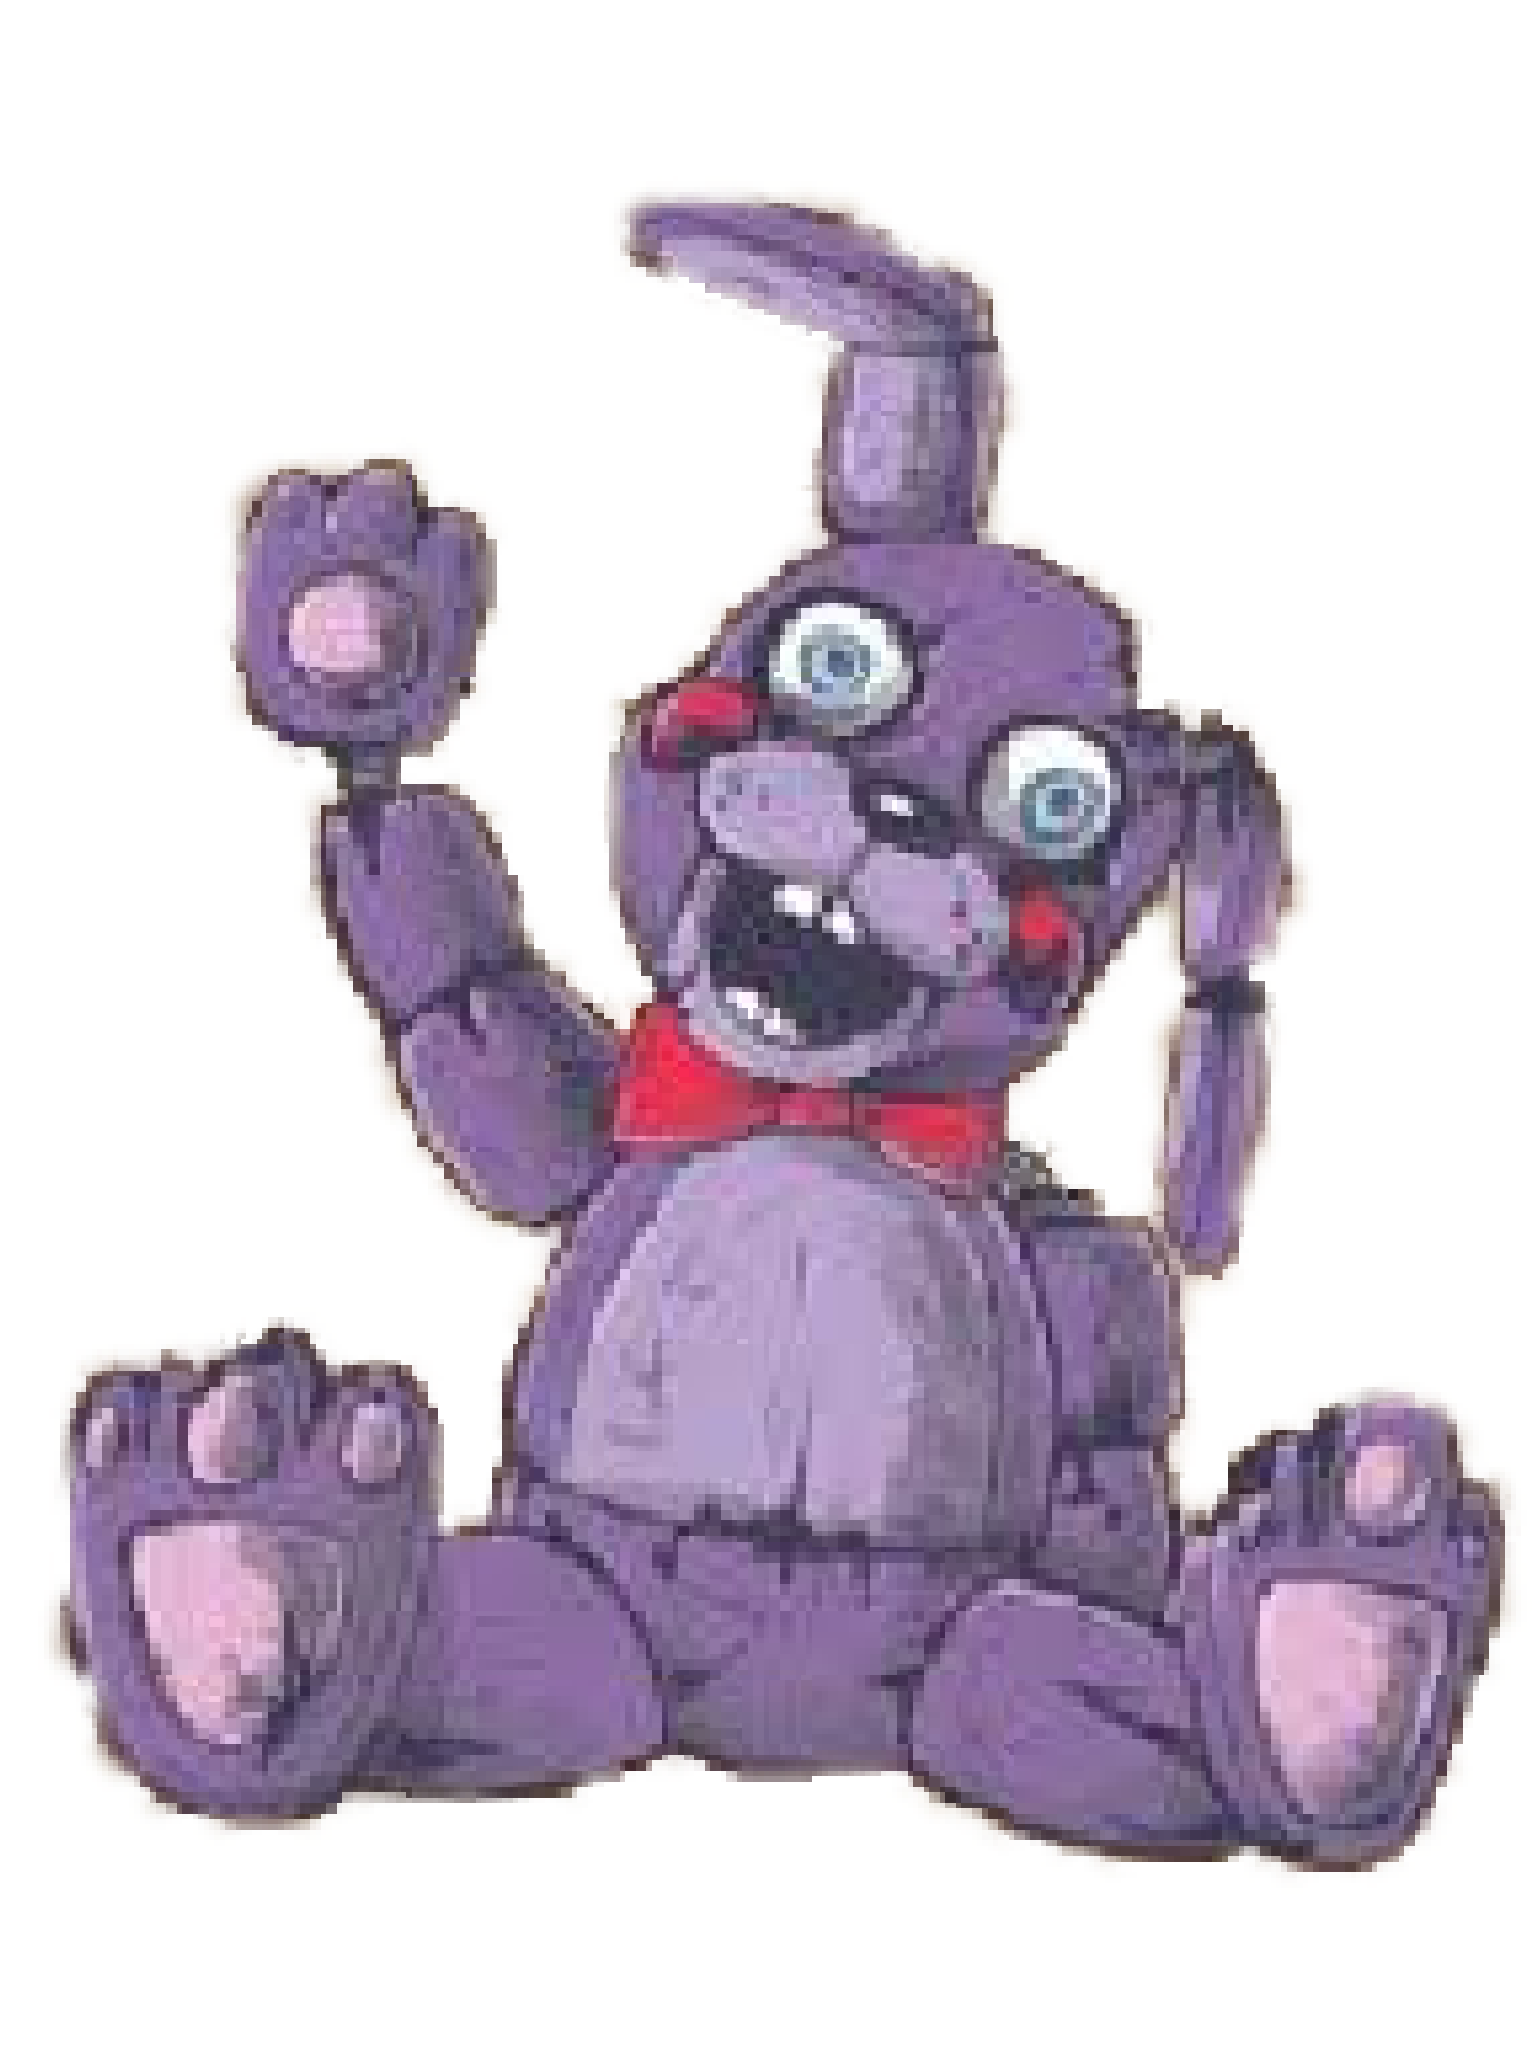 fnaf videos for kids roblox the twisted ones